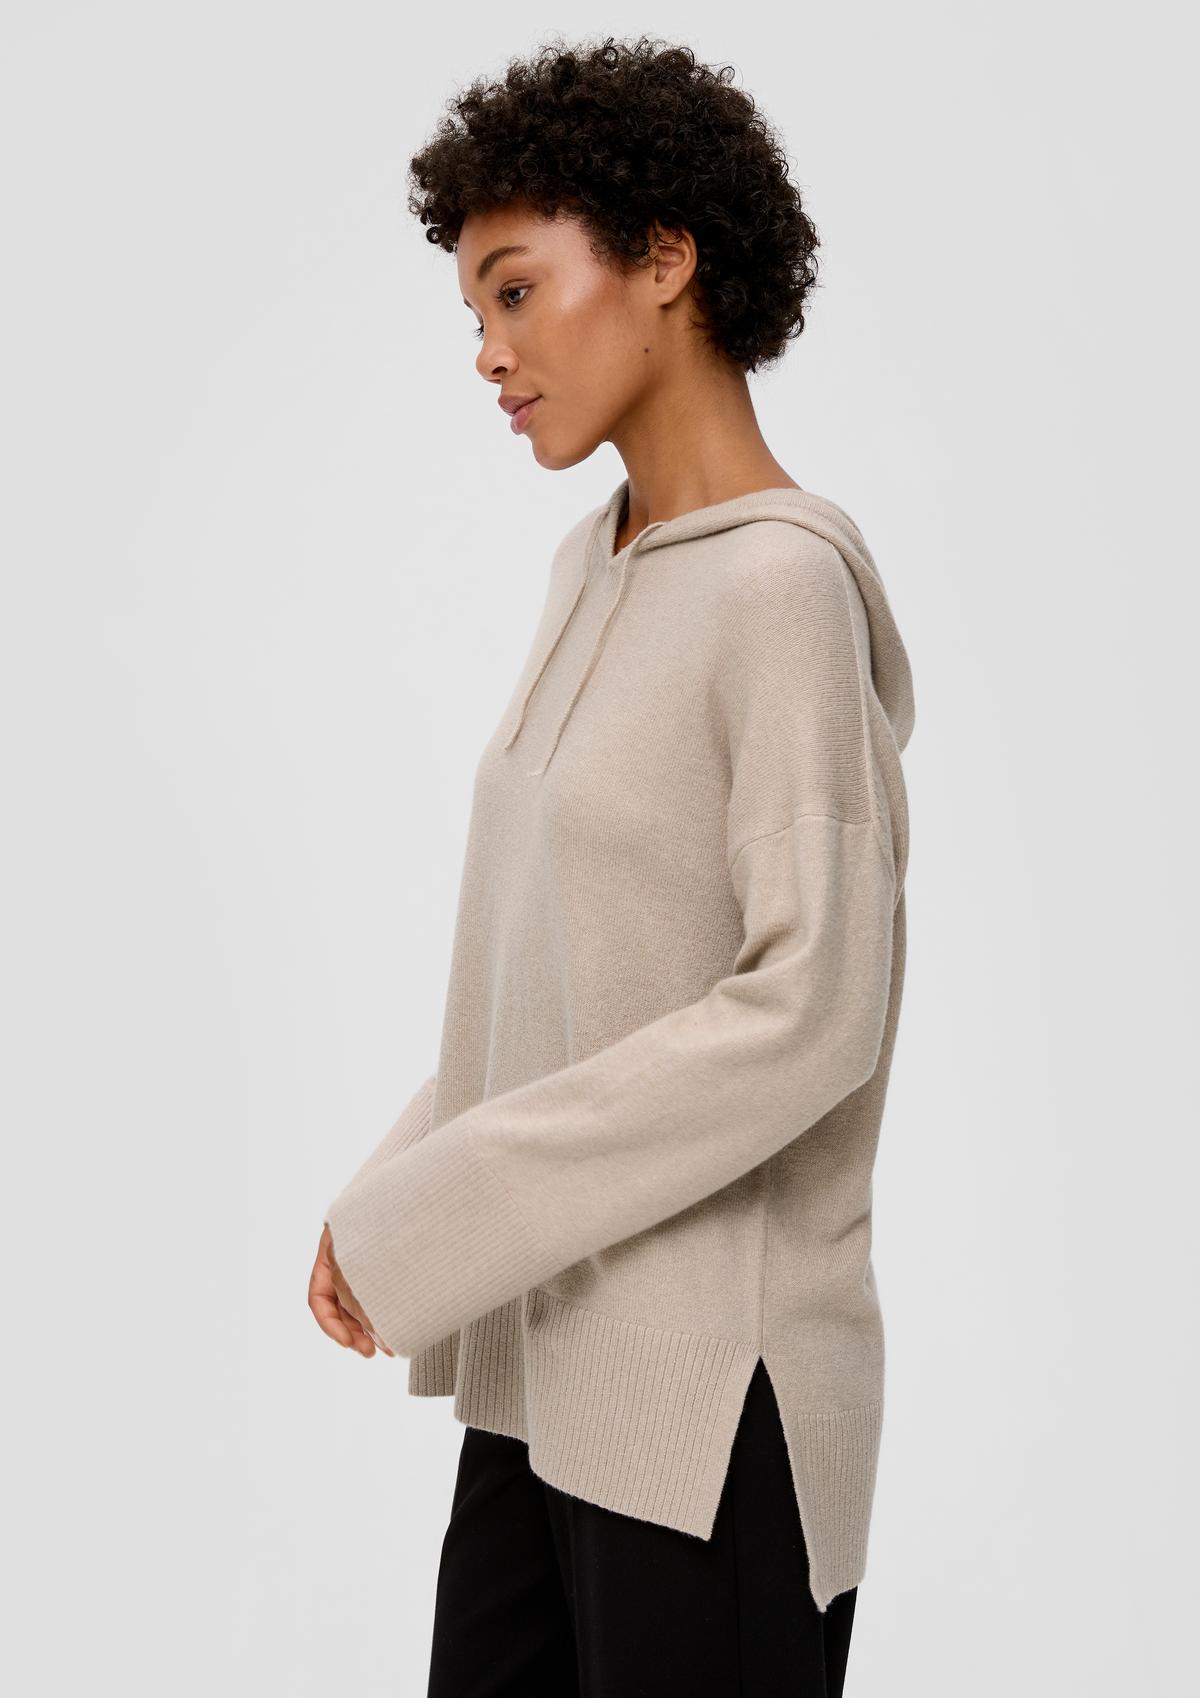 Knitted jumper with an elongated back hem